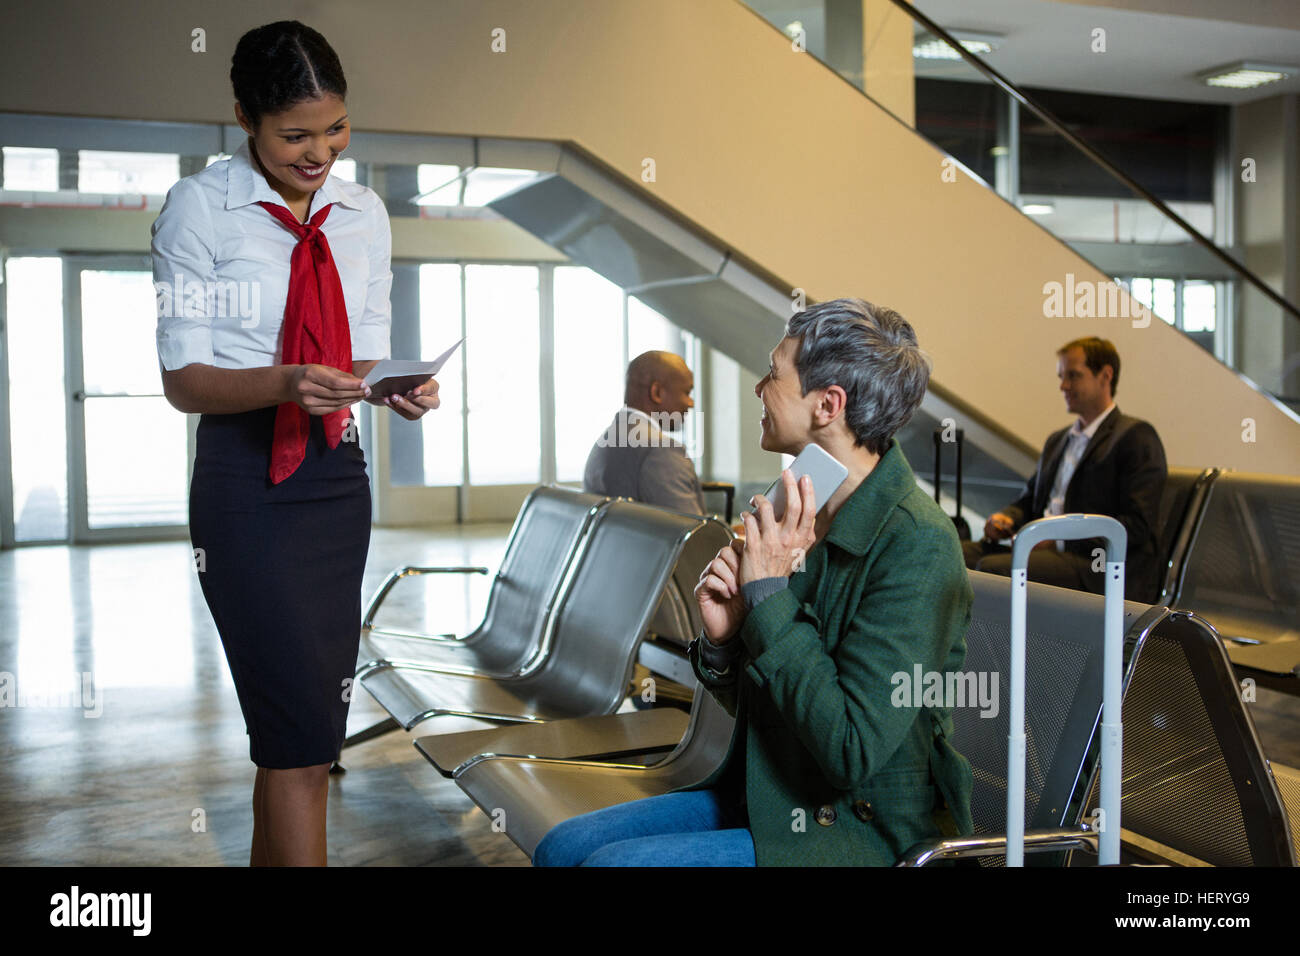 Airline check-in attendant checking passport at check-in waiting area at airport Stock Photo